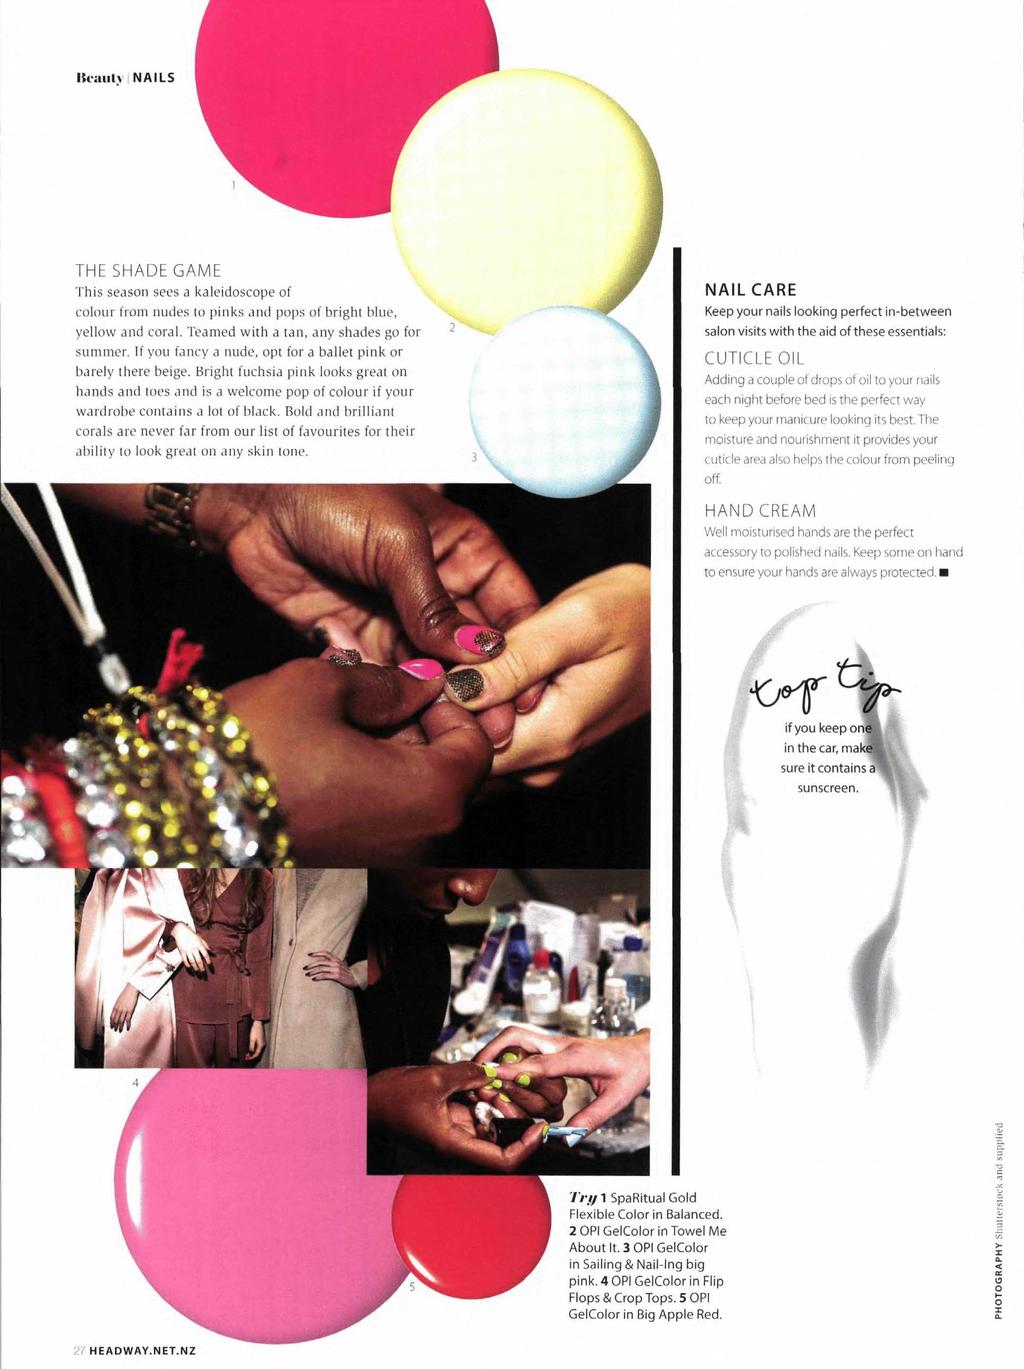 ID 669574625 BRIEF MEDIAJ(W INDEX 1 PAGE 8 of 8 Kvaiilv NAILS THE SHADE GAME This season sees a kaleidoscope of colour from nudes to pinks and pops of bright blue, yellow and coral.